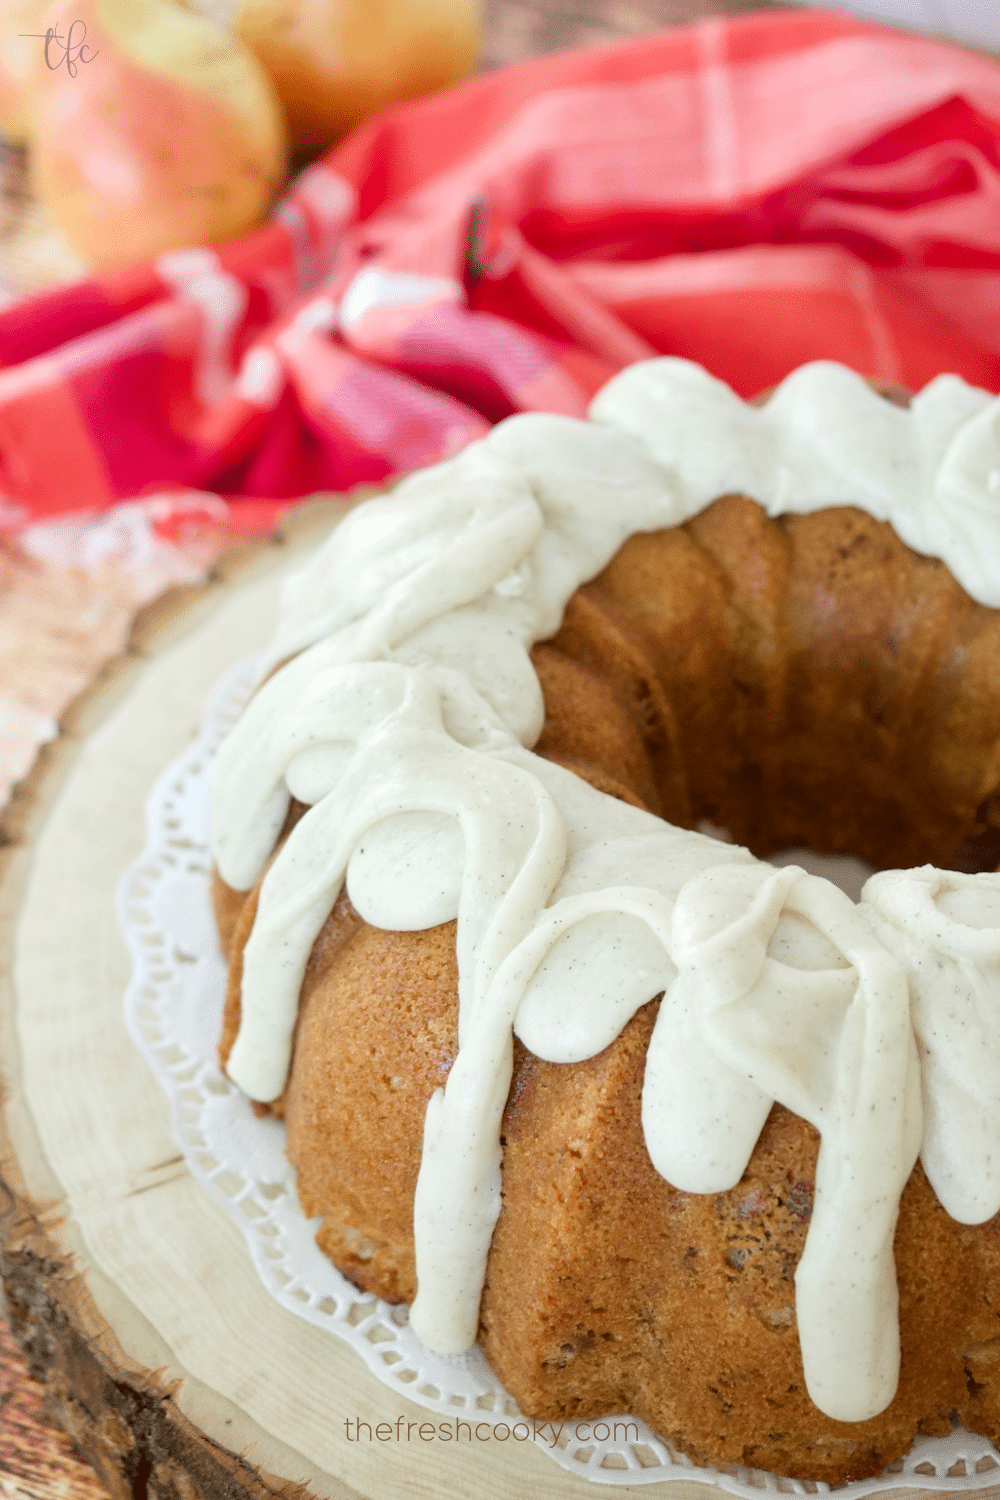 Image of glazed pear bundt cake with fingers of glaze dripping down the sides.